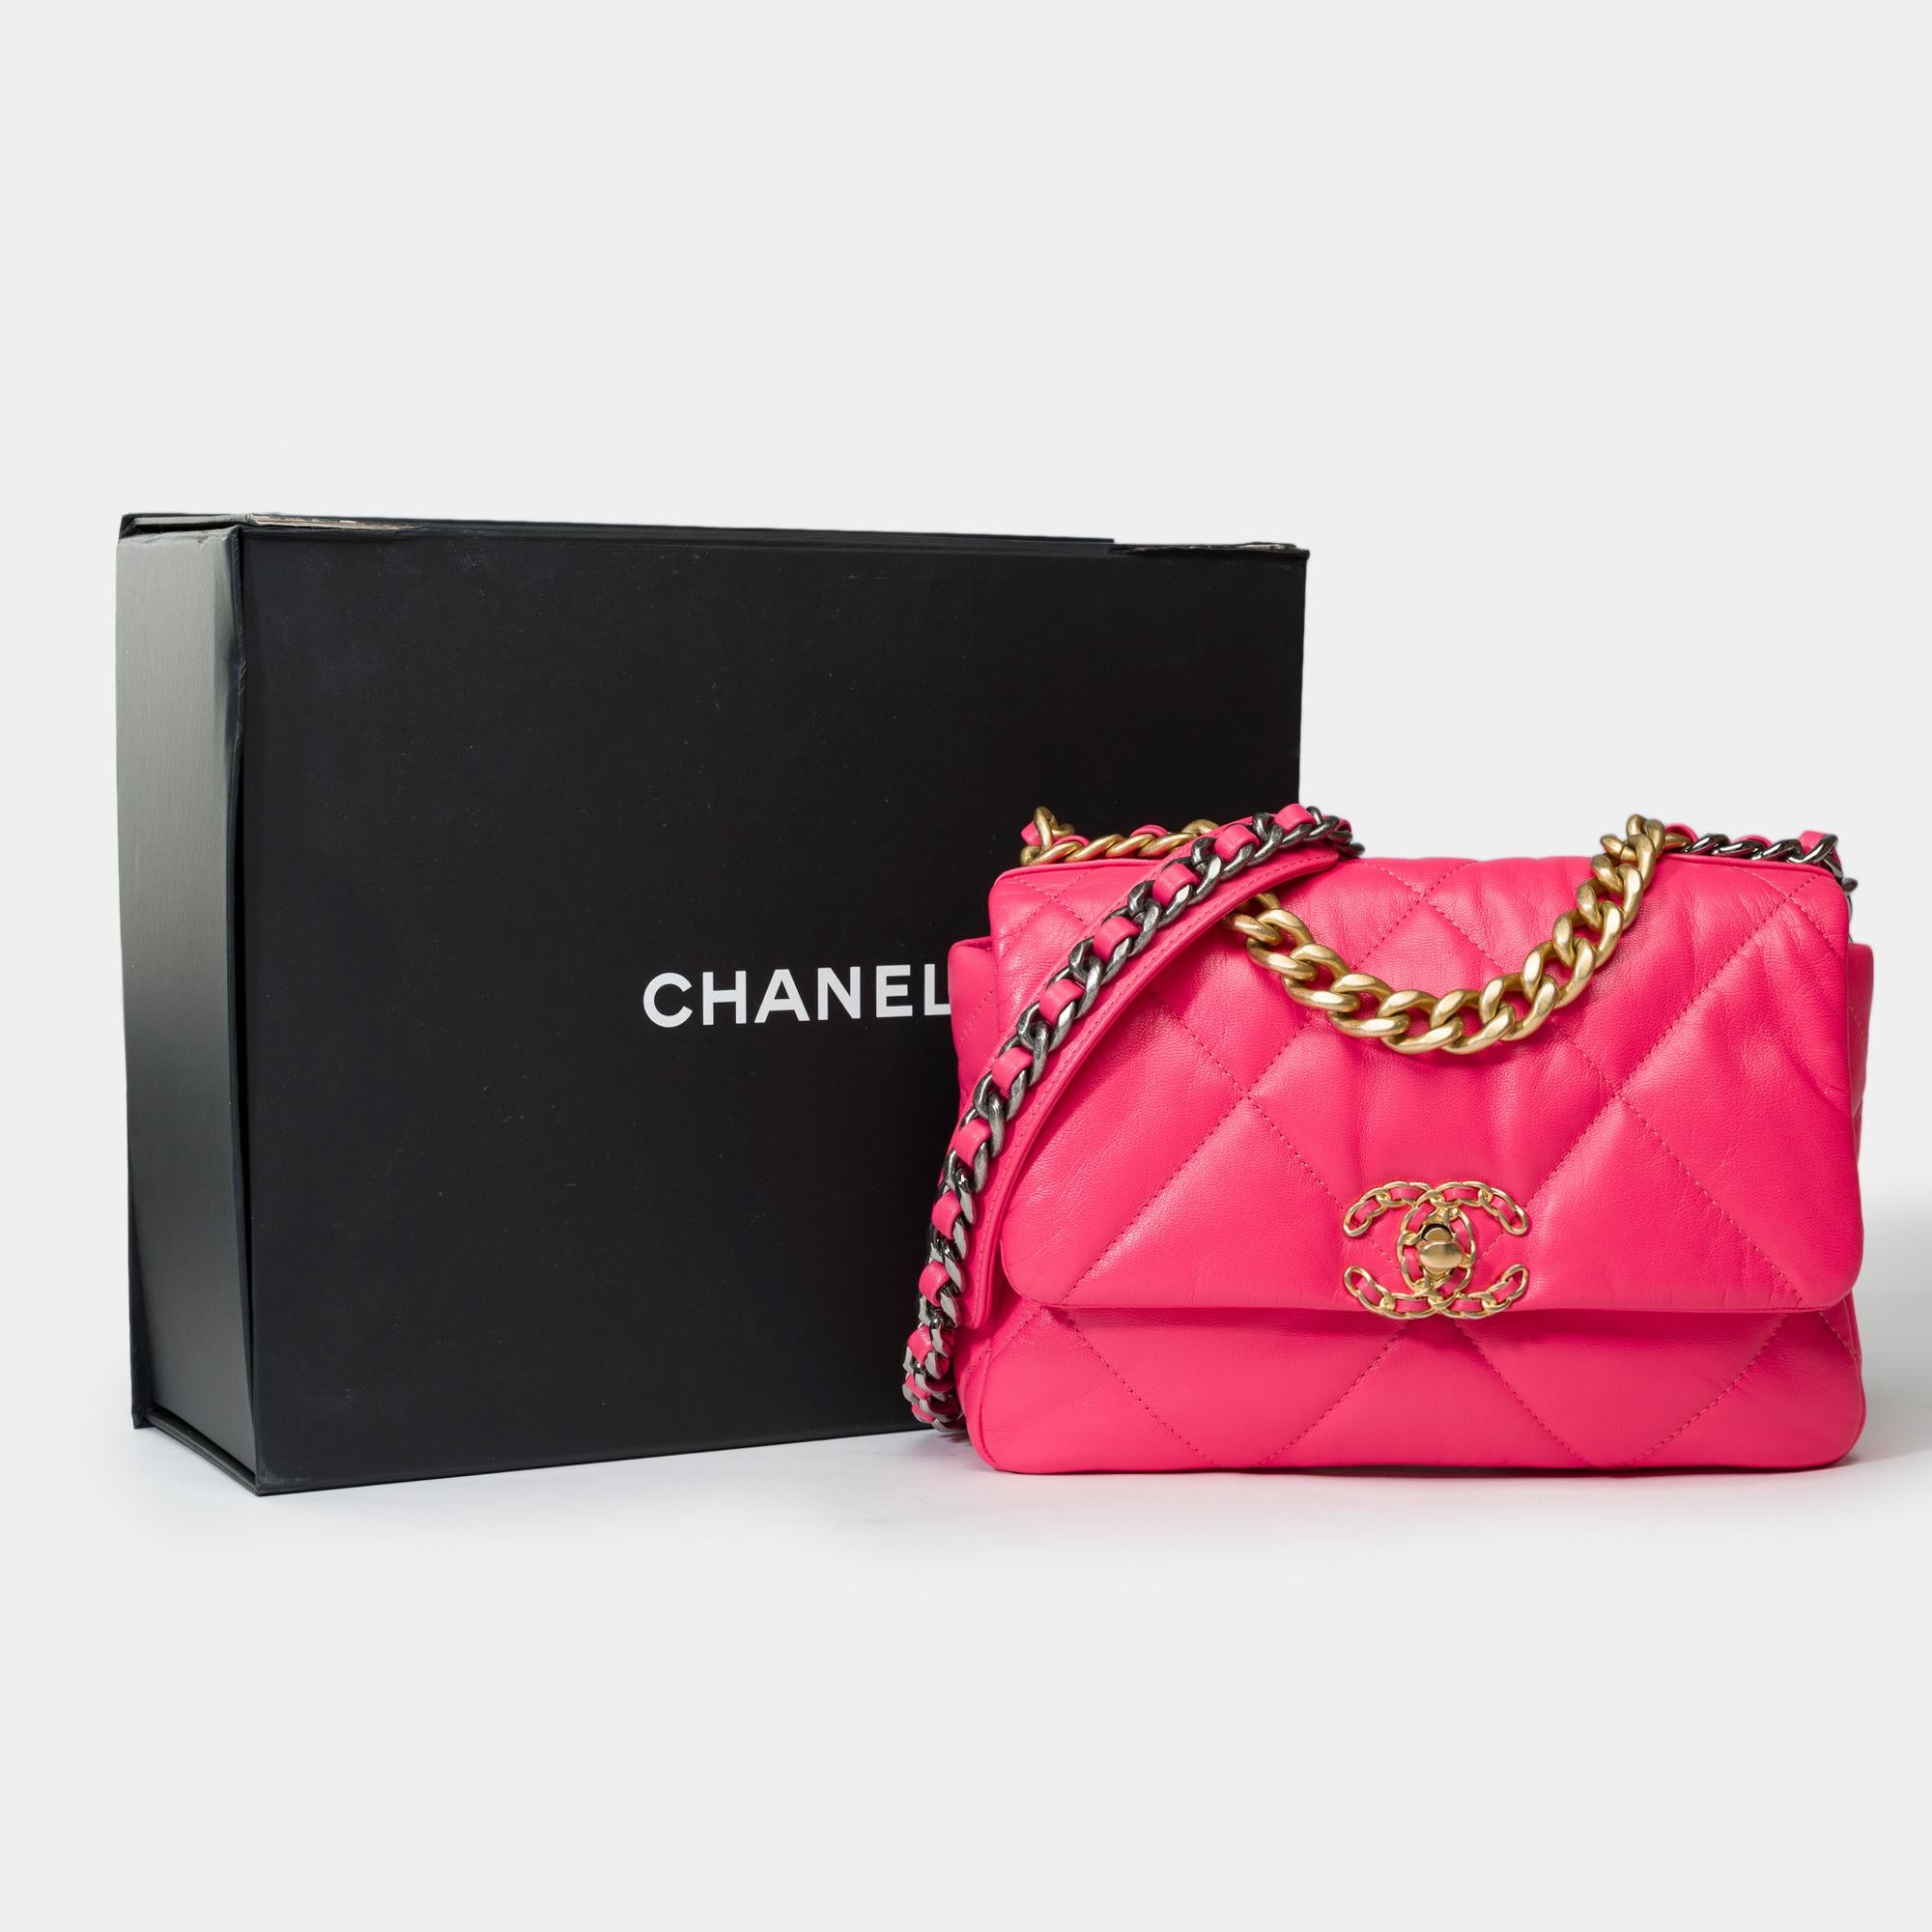 Stunning​ ​Chanel​ ​19​ ​shoulder​ ​flap​ ​bag​ ​in​ ​Pink​ ​quilted​ ​leather​ ​,​ ​trim​ ​in​ ​gold​ ​and​ ​silver​ ​metal,​ ​handle​ ​in​ ​aged​ ​gold​ ​metal,​ ​a​ ​chain​ ​handle​ ​in​ ​gold​ ​and​ ​silver​ ​metal​ ​interlaced​ ​with​ ​pink​